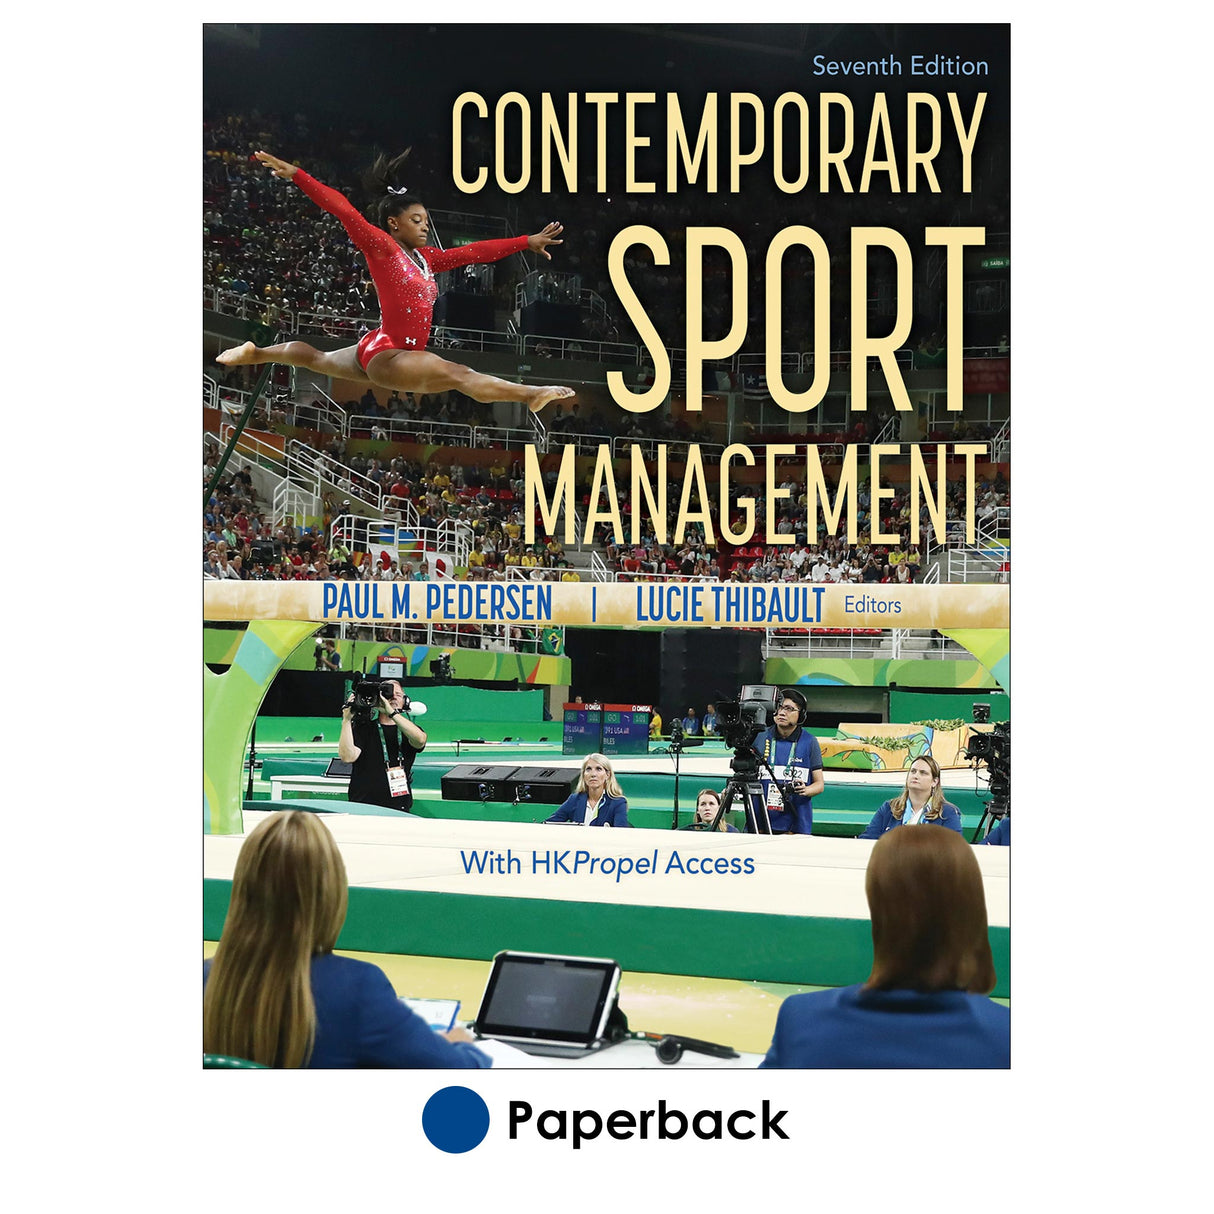 Contemporary Sport Management 7th Edition With HKPropel Access